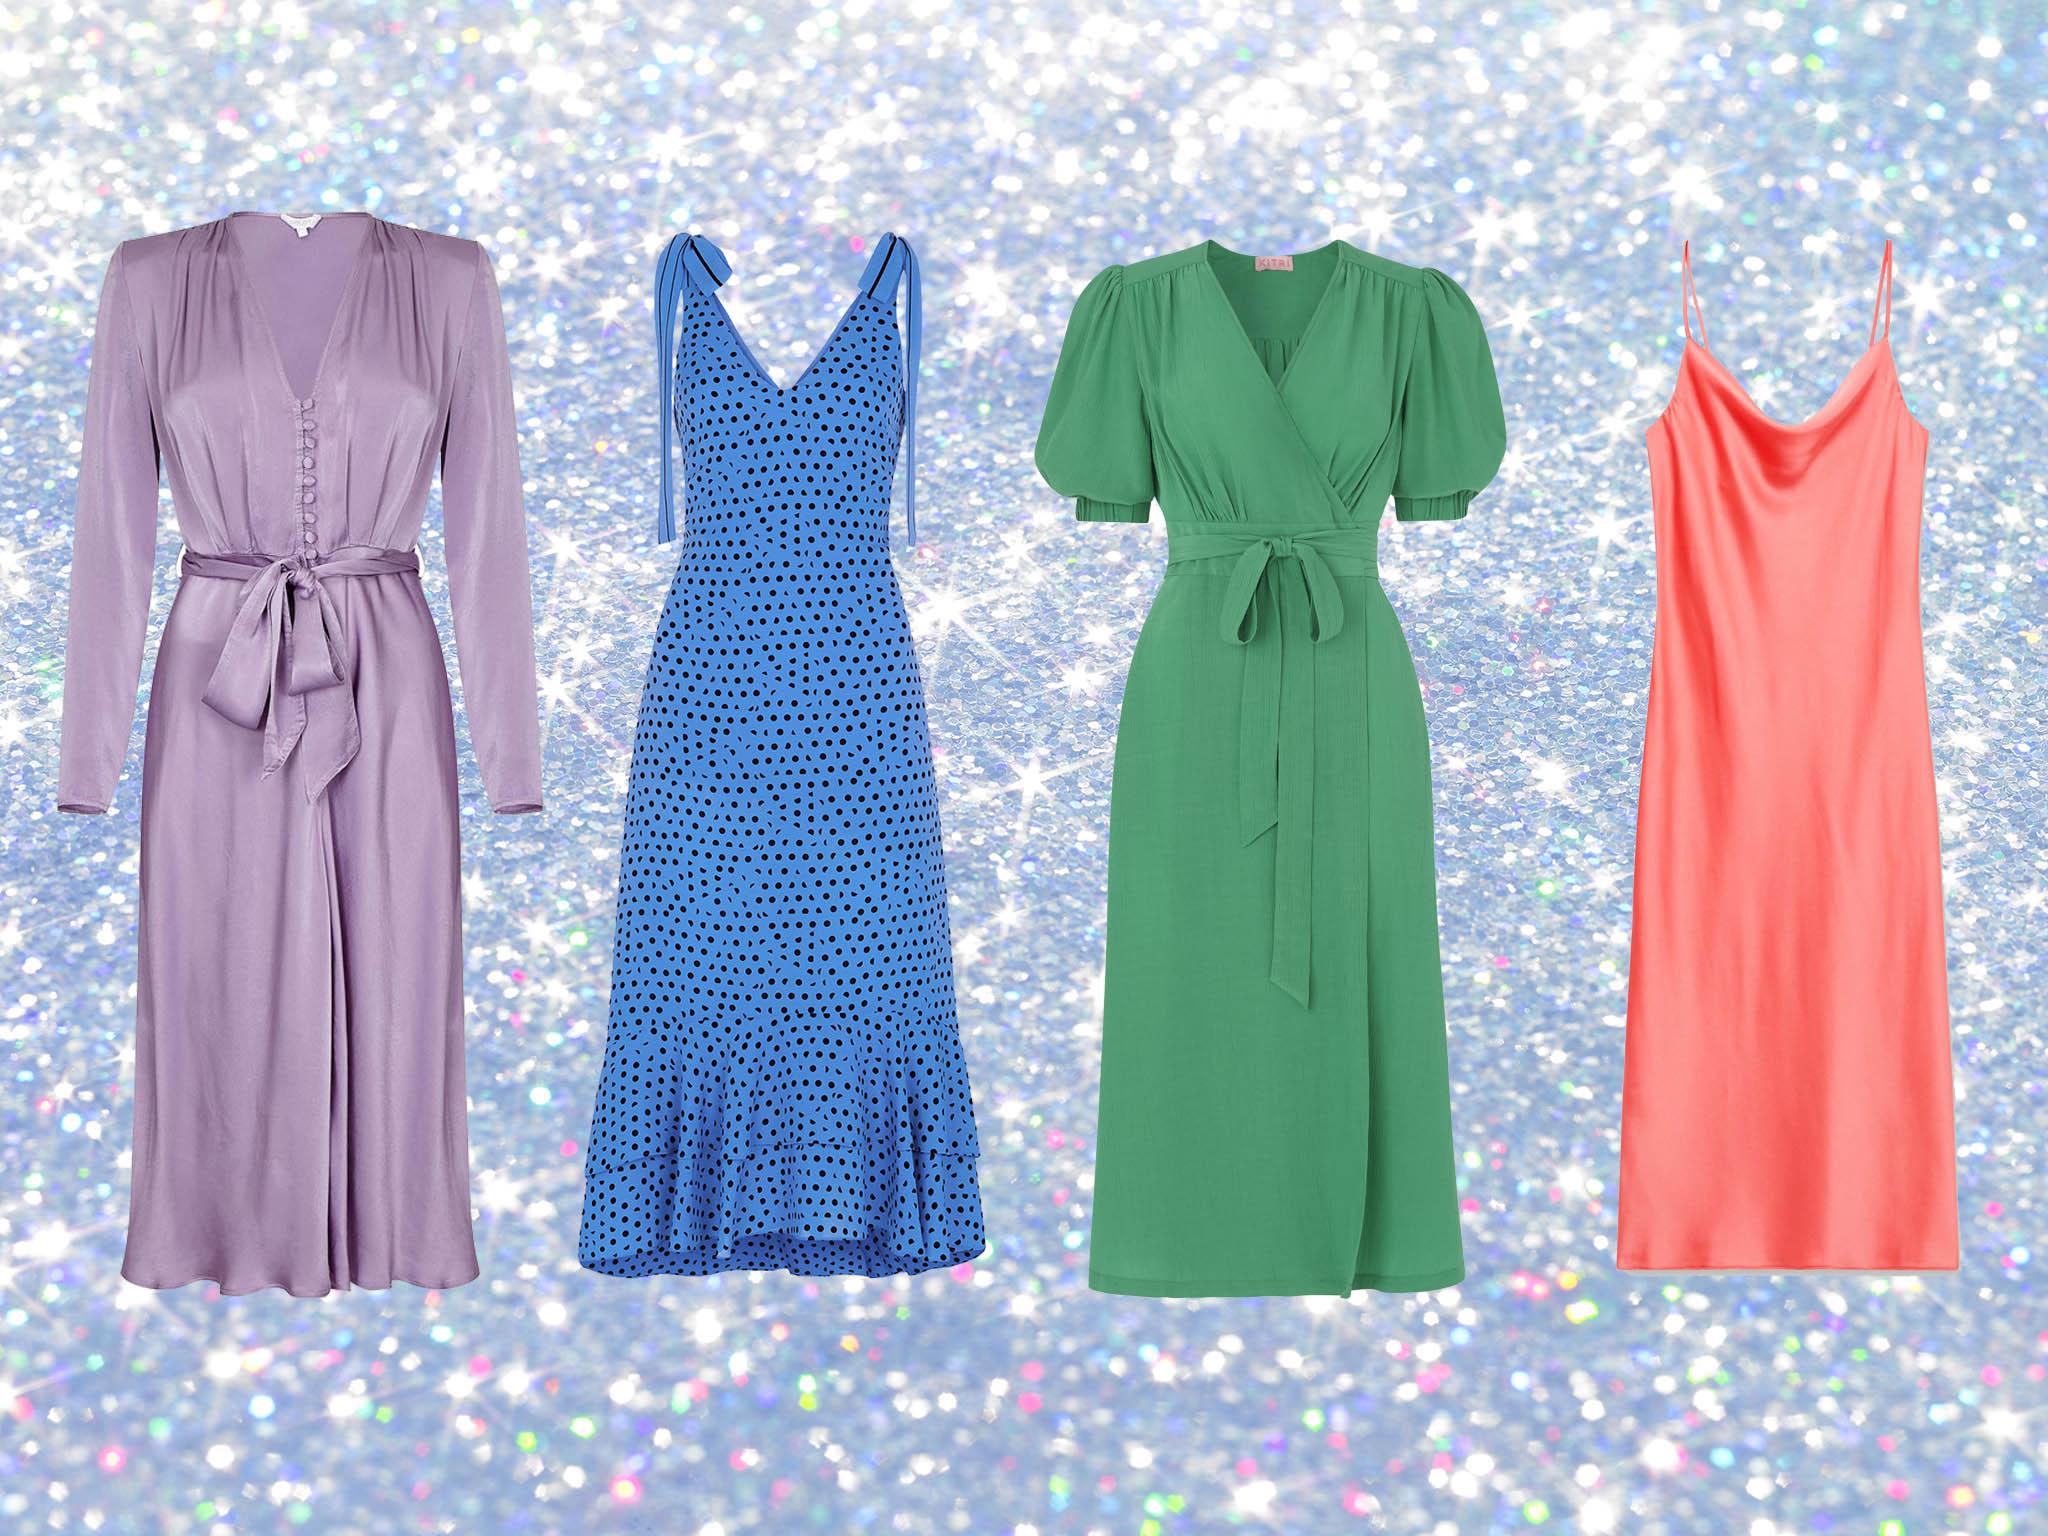 This season it’s all about the midi dress, wrap styles and silk-look slips